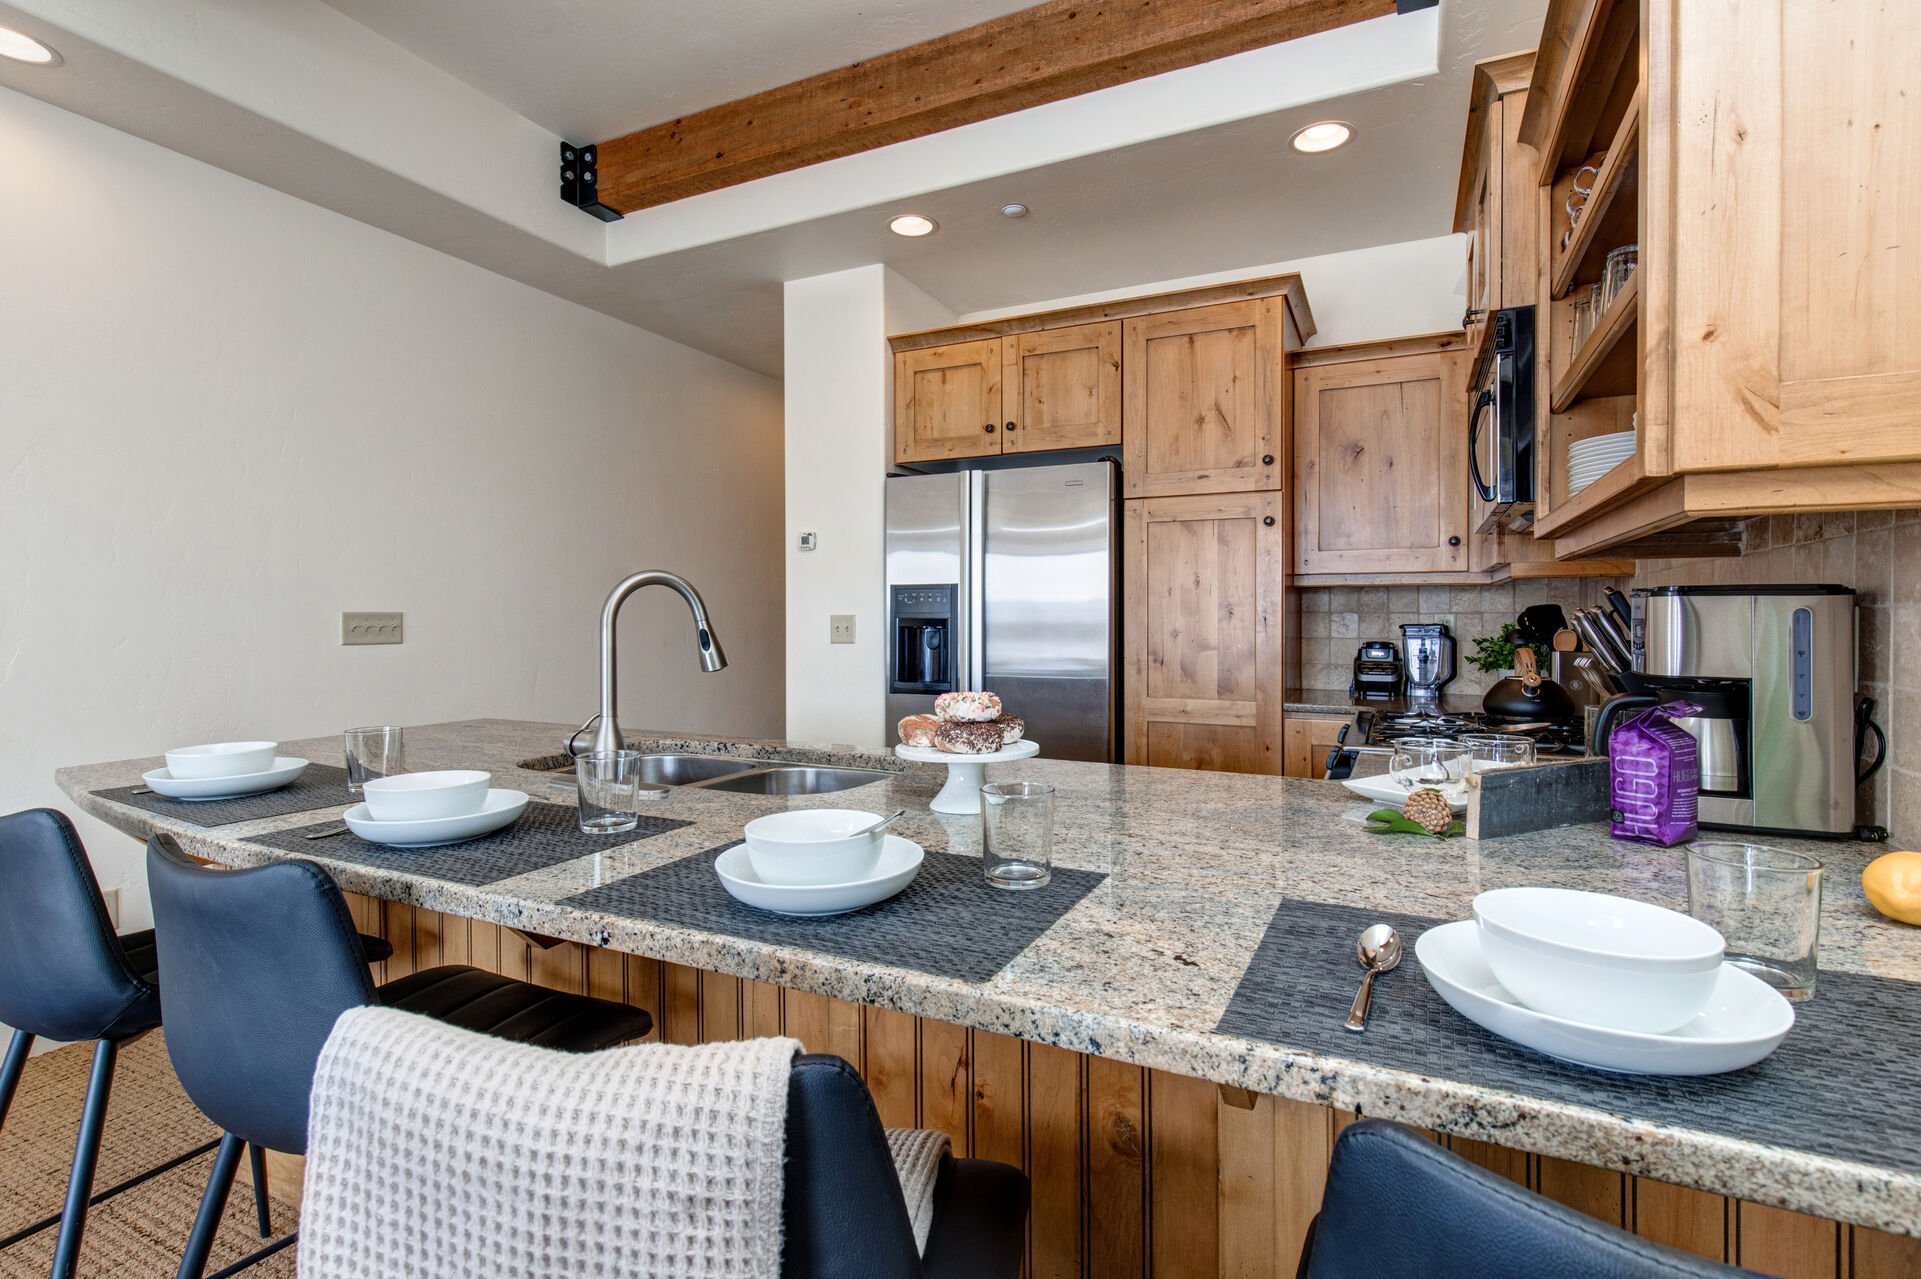 Fully Equipped Kitchen with granite countertops, stainless steel appliances, built-in water and ice dispenser, and bar seating for four